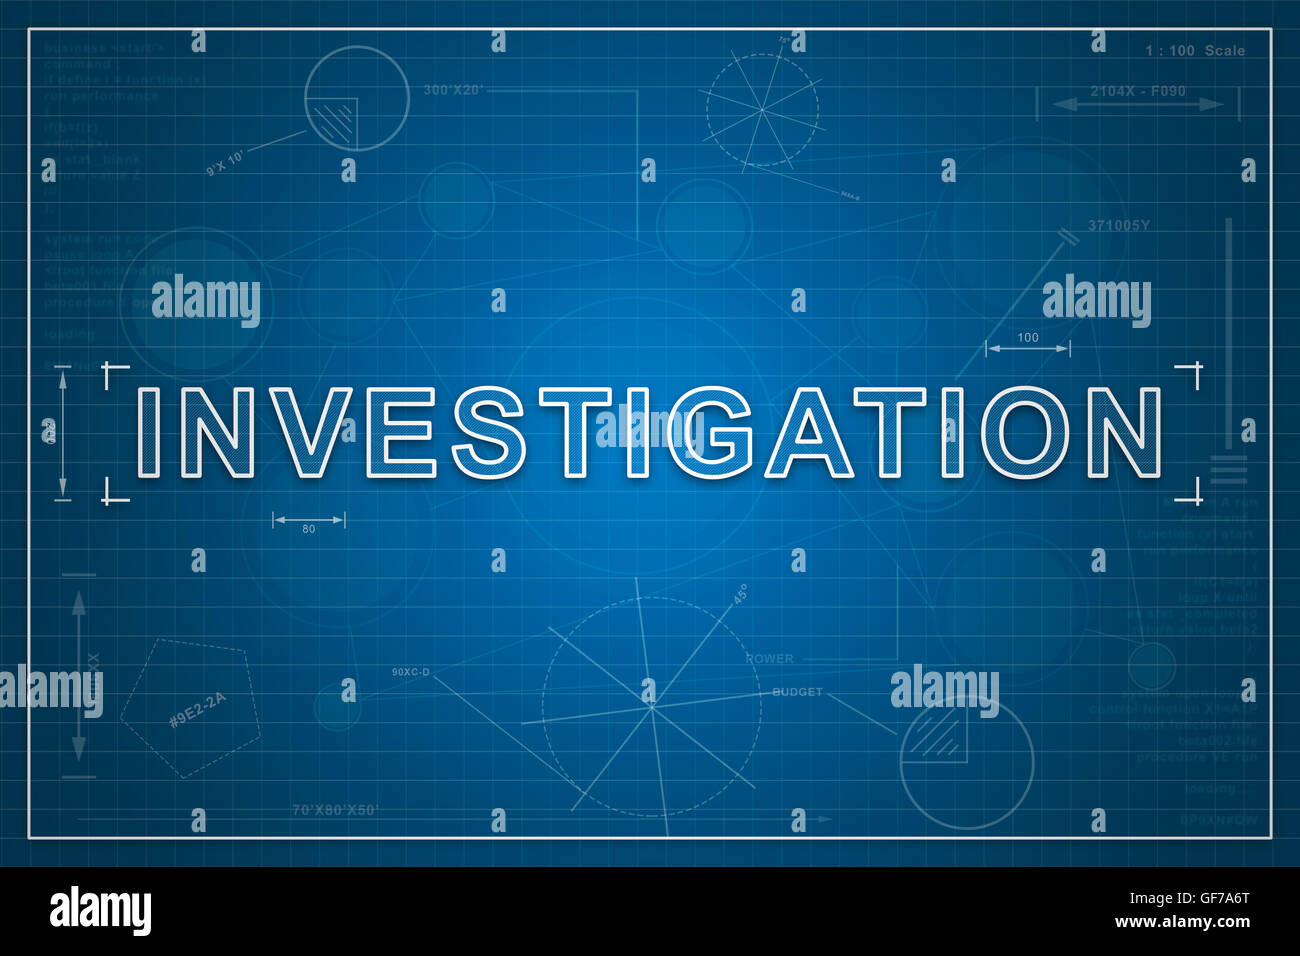 Investigation on paper blueprint background, business concept Stock Photo